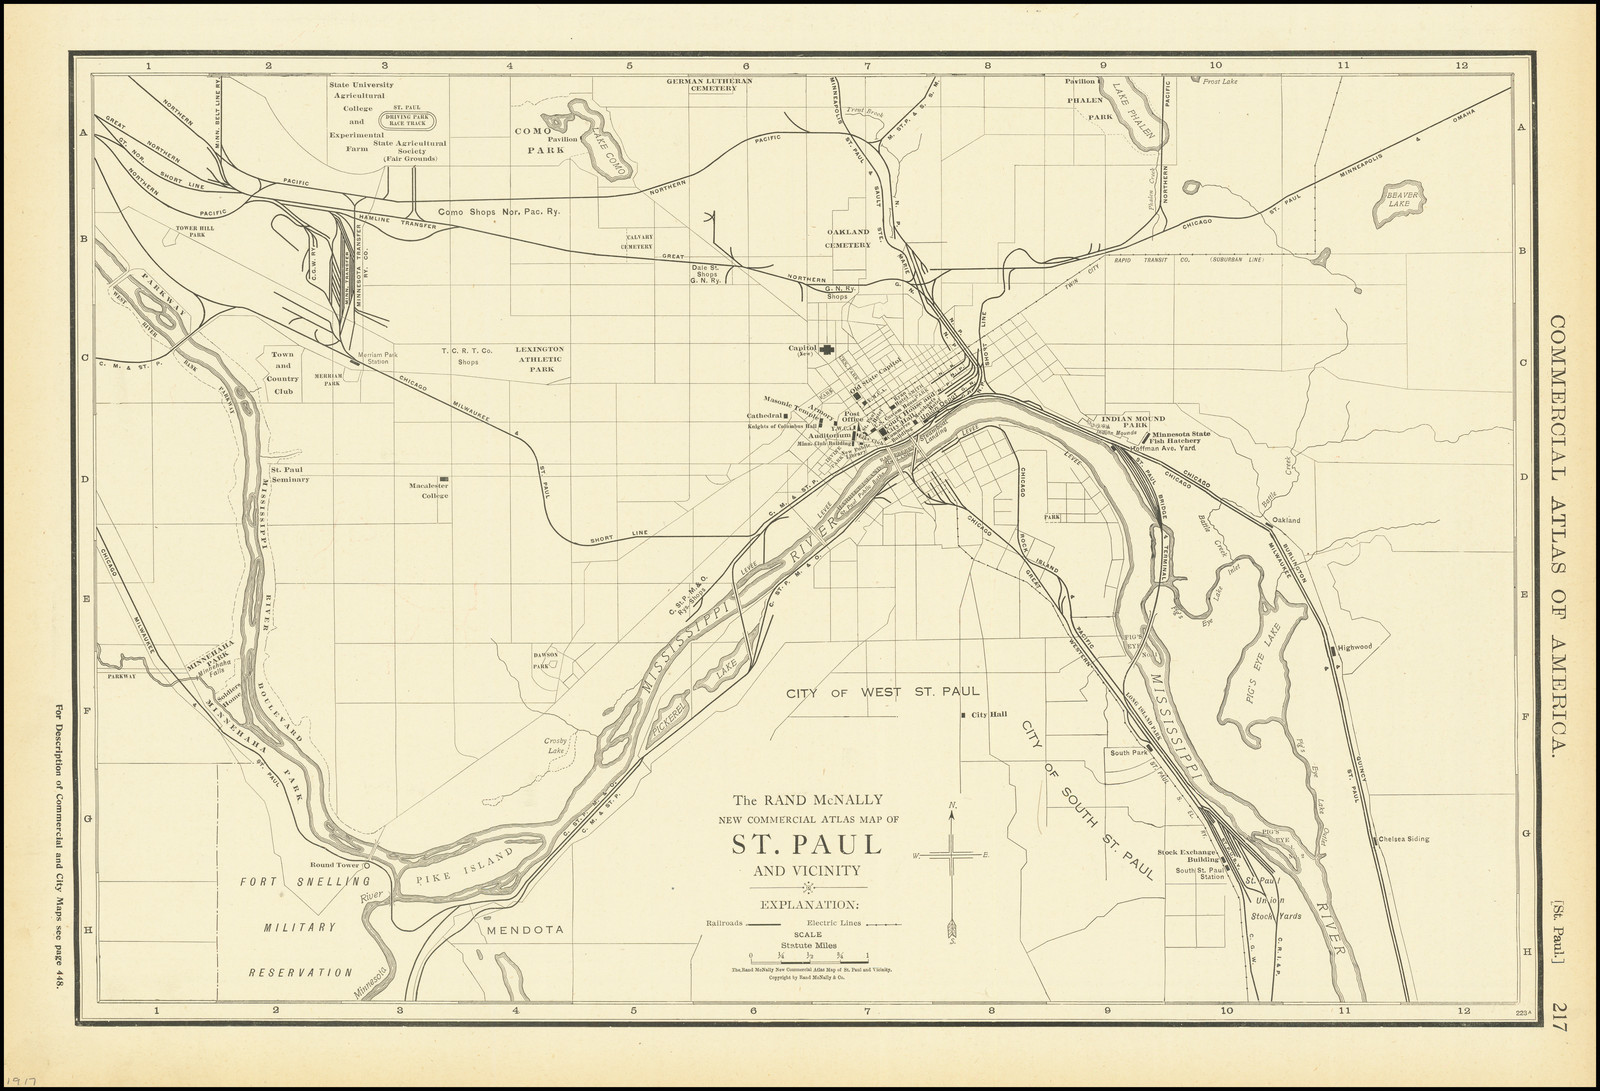 The Rand McNally New Commercial Atlas Map of St. Paul